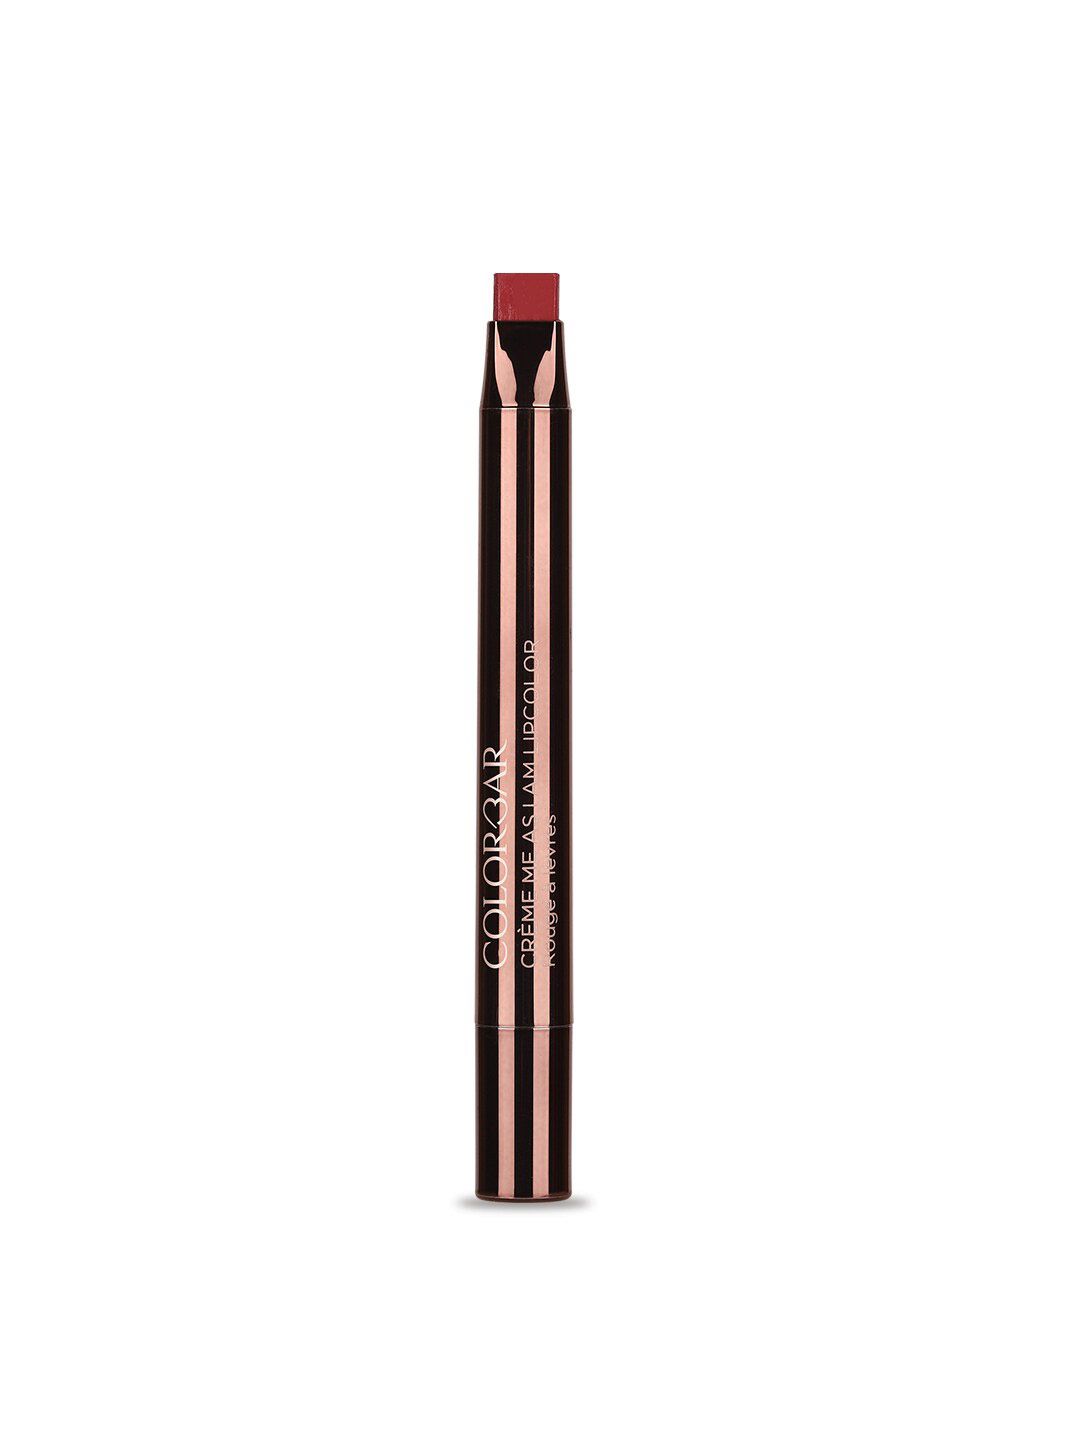 Colorbar Crme me as I am Lipstick - Maroon Fan Girl - 002 Price in India